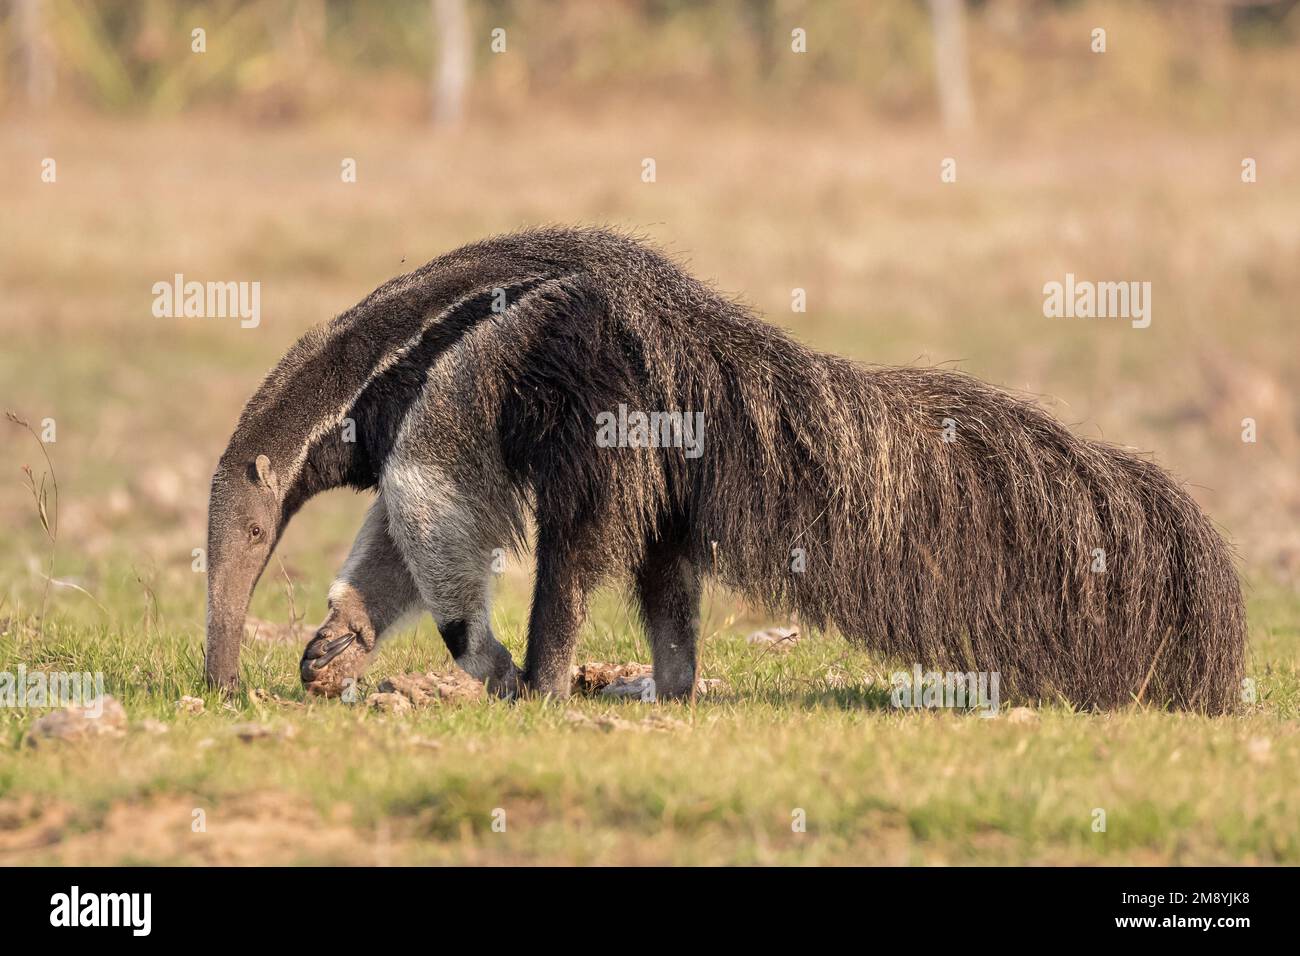 A giant anteater (Myrmecophaga tridactyla) foraging through the grasslands of the Pantanal in Brazil during dry season. Stock Photo